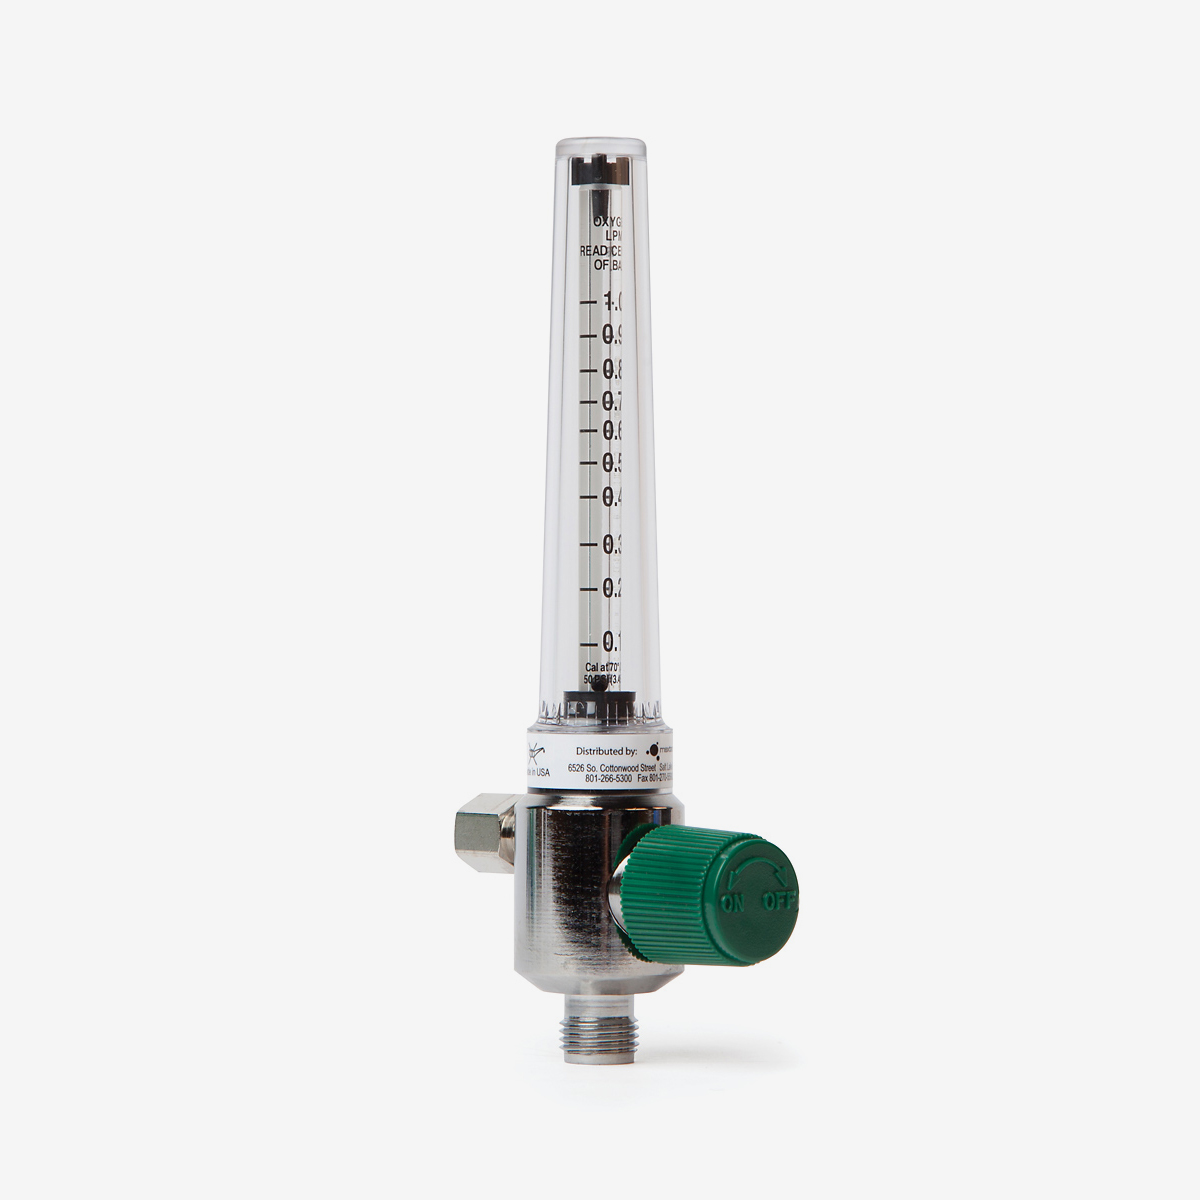 0-1 liters per minute flow meter with green knob on white background shown at an angle